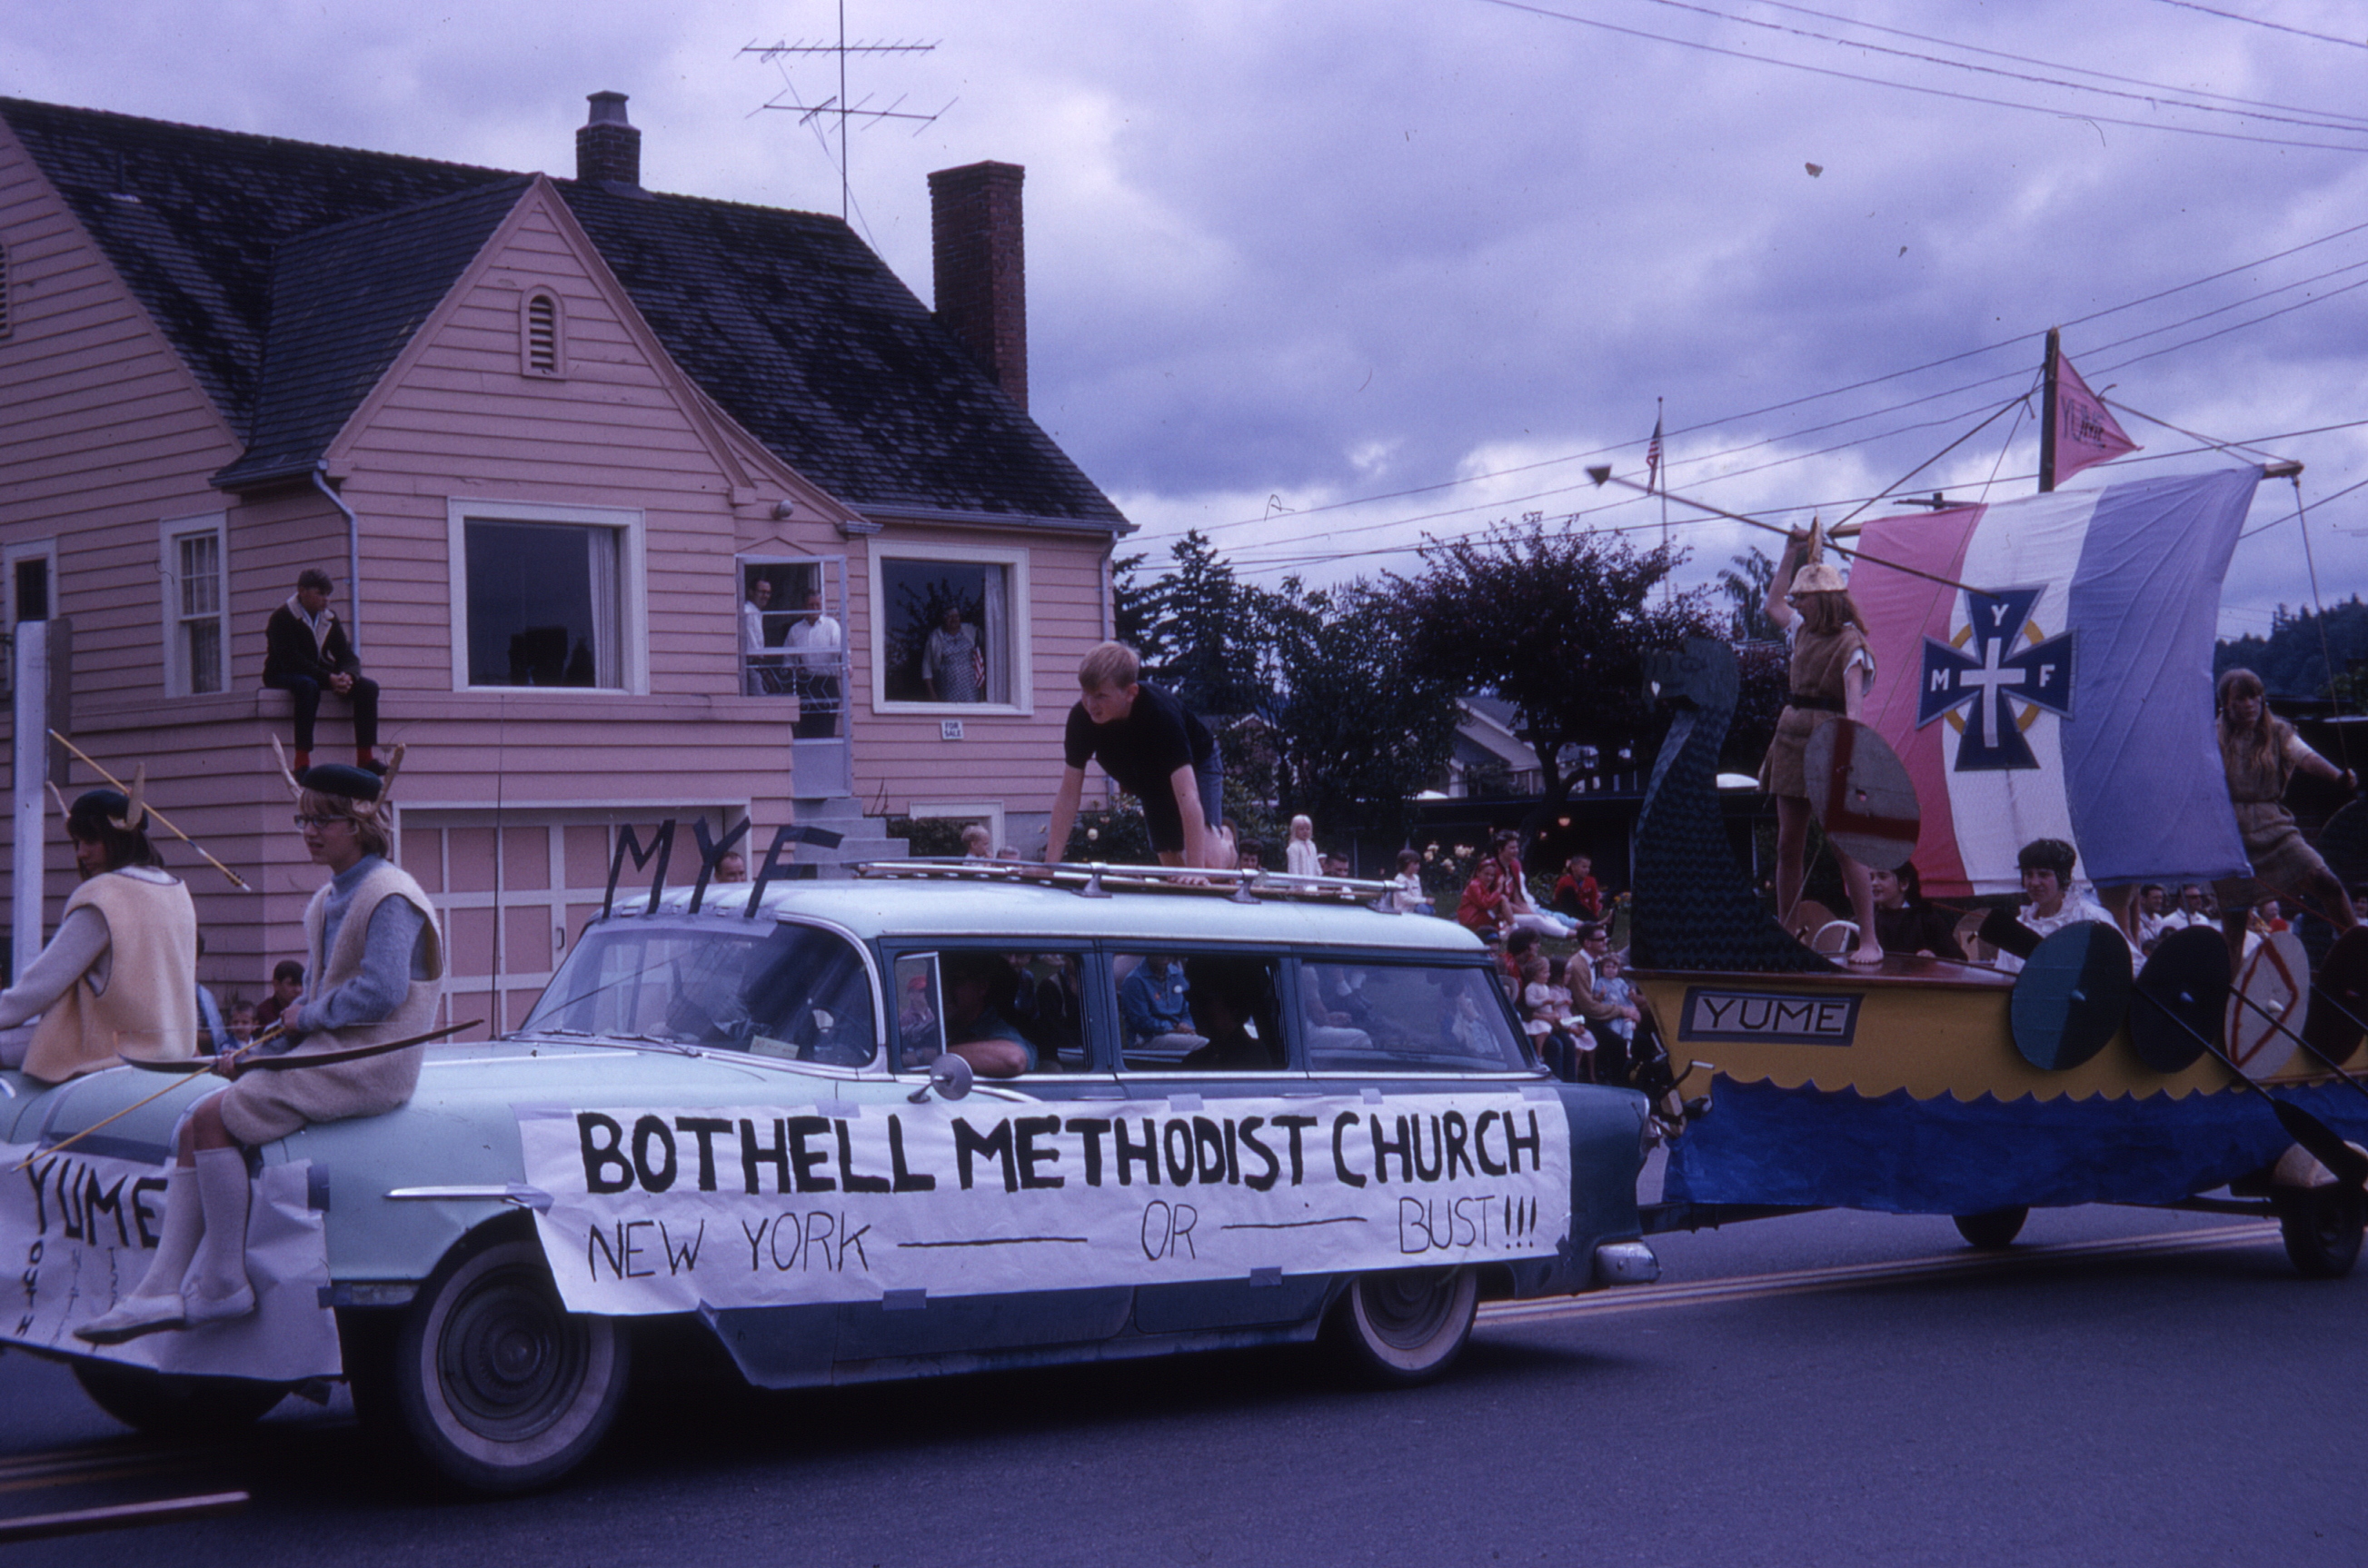 MYF, the church youth group (Methodist Youth Fellowship), organized a summer cross-country bus trip for its members. The Viking theme of the float seems unrelated.